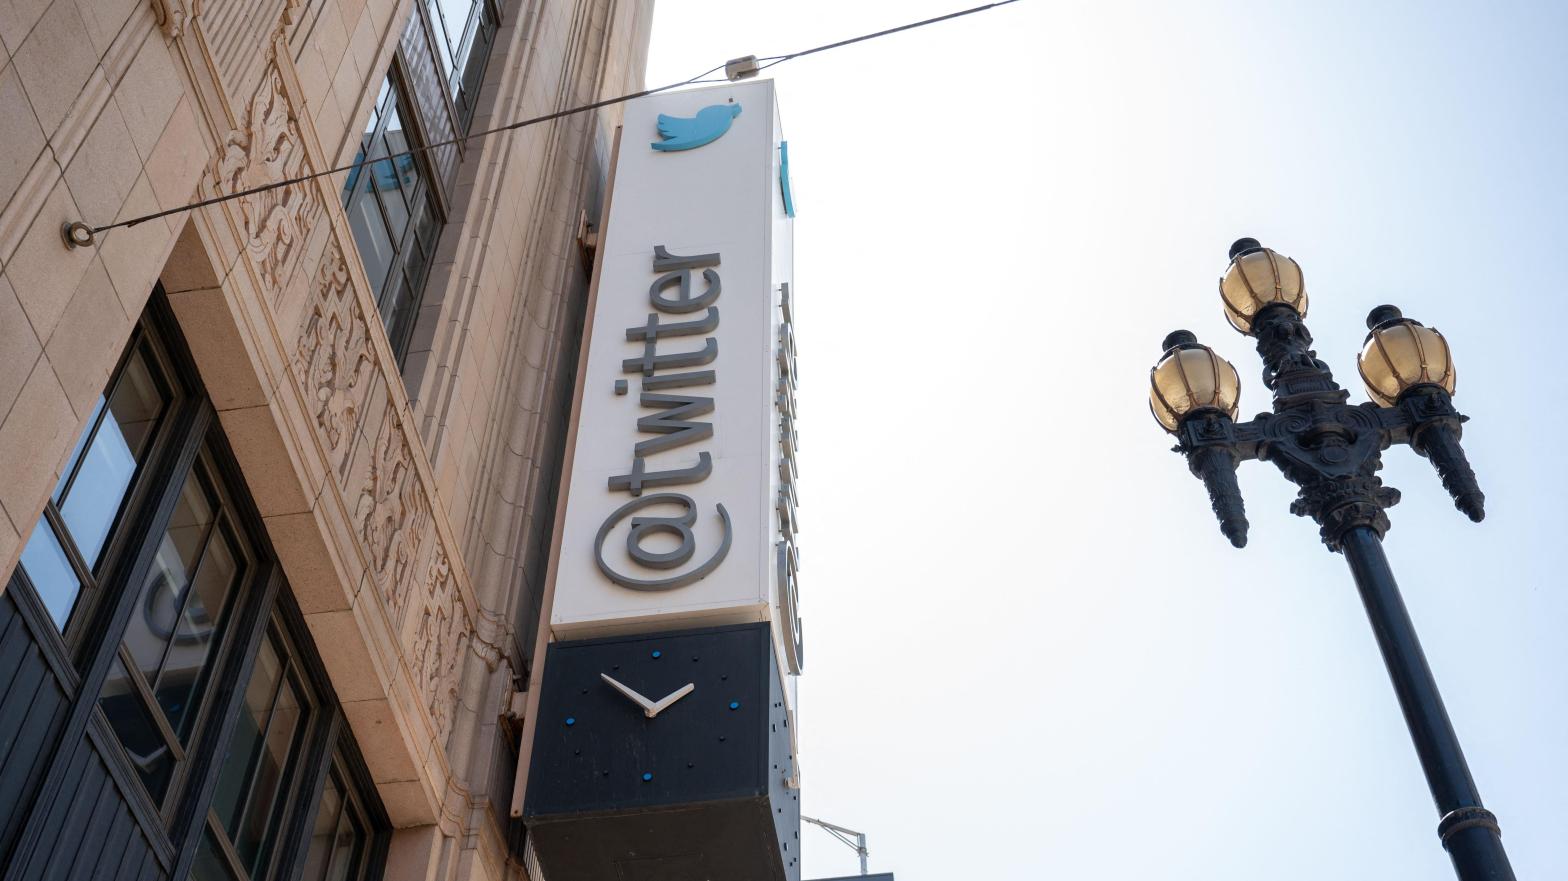 Twitter is the latest tech company to announce layoffs. The company has been turned upside down since Elon Musk announced plans to acquire it earlier this year. (Photo: Amy Osborne, Getty Images)